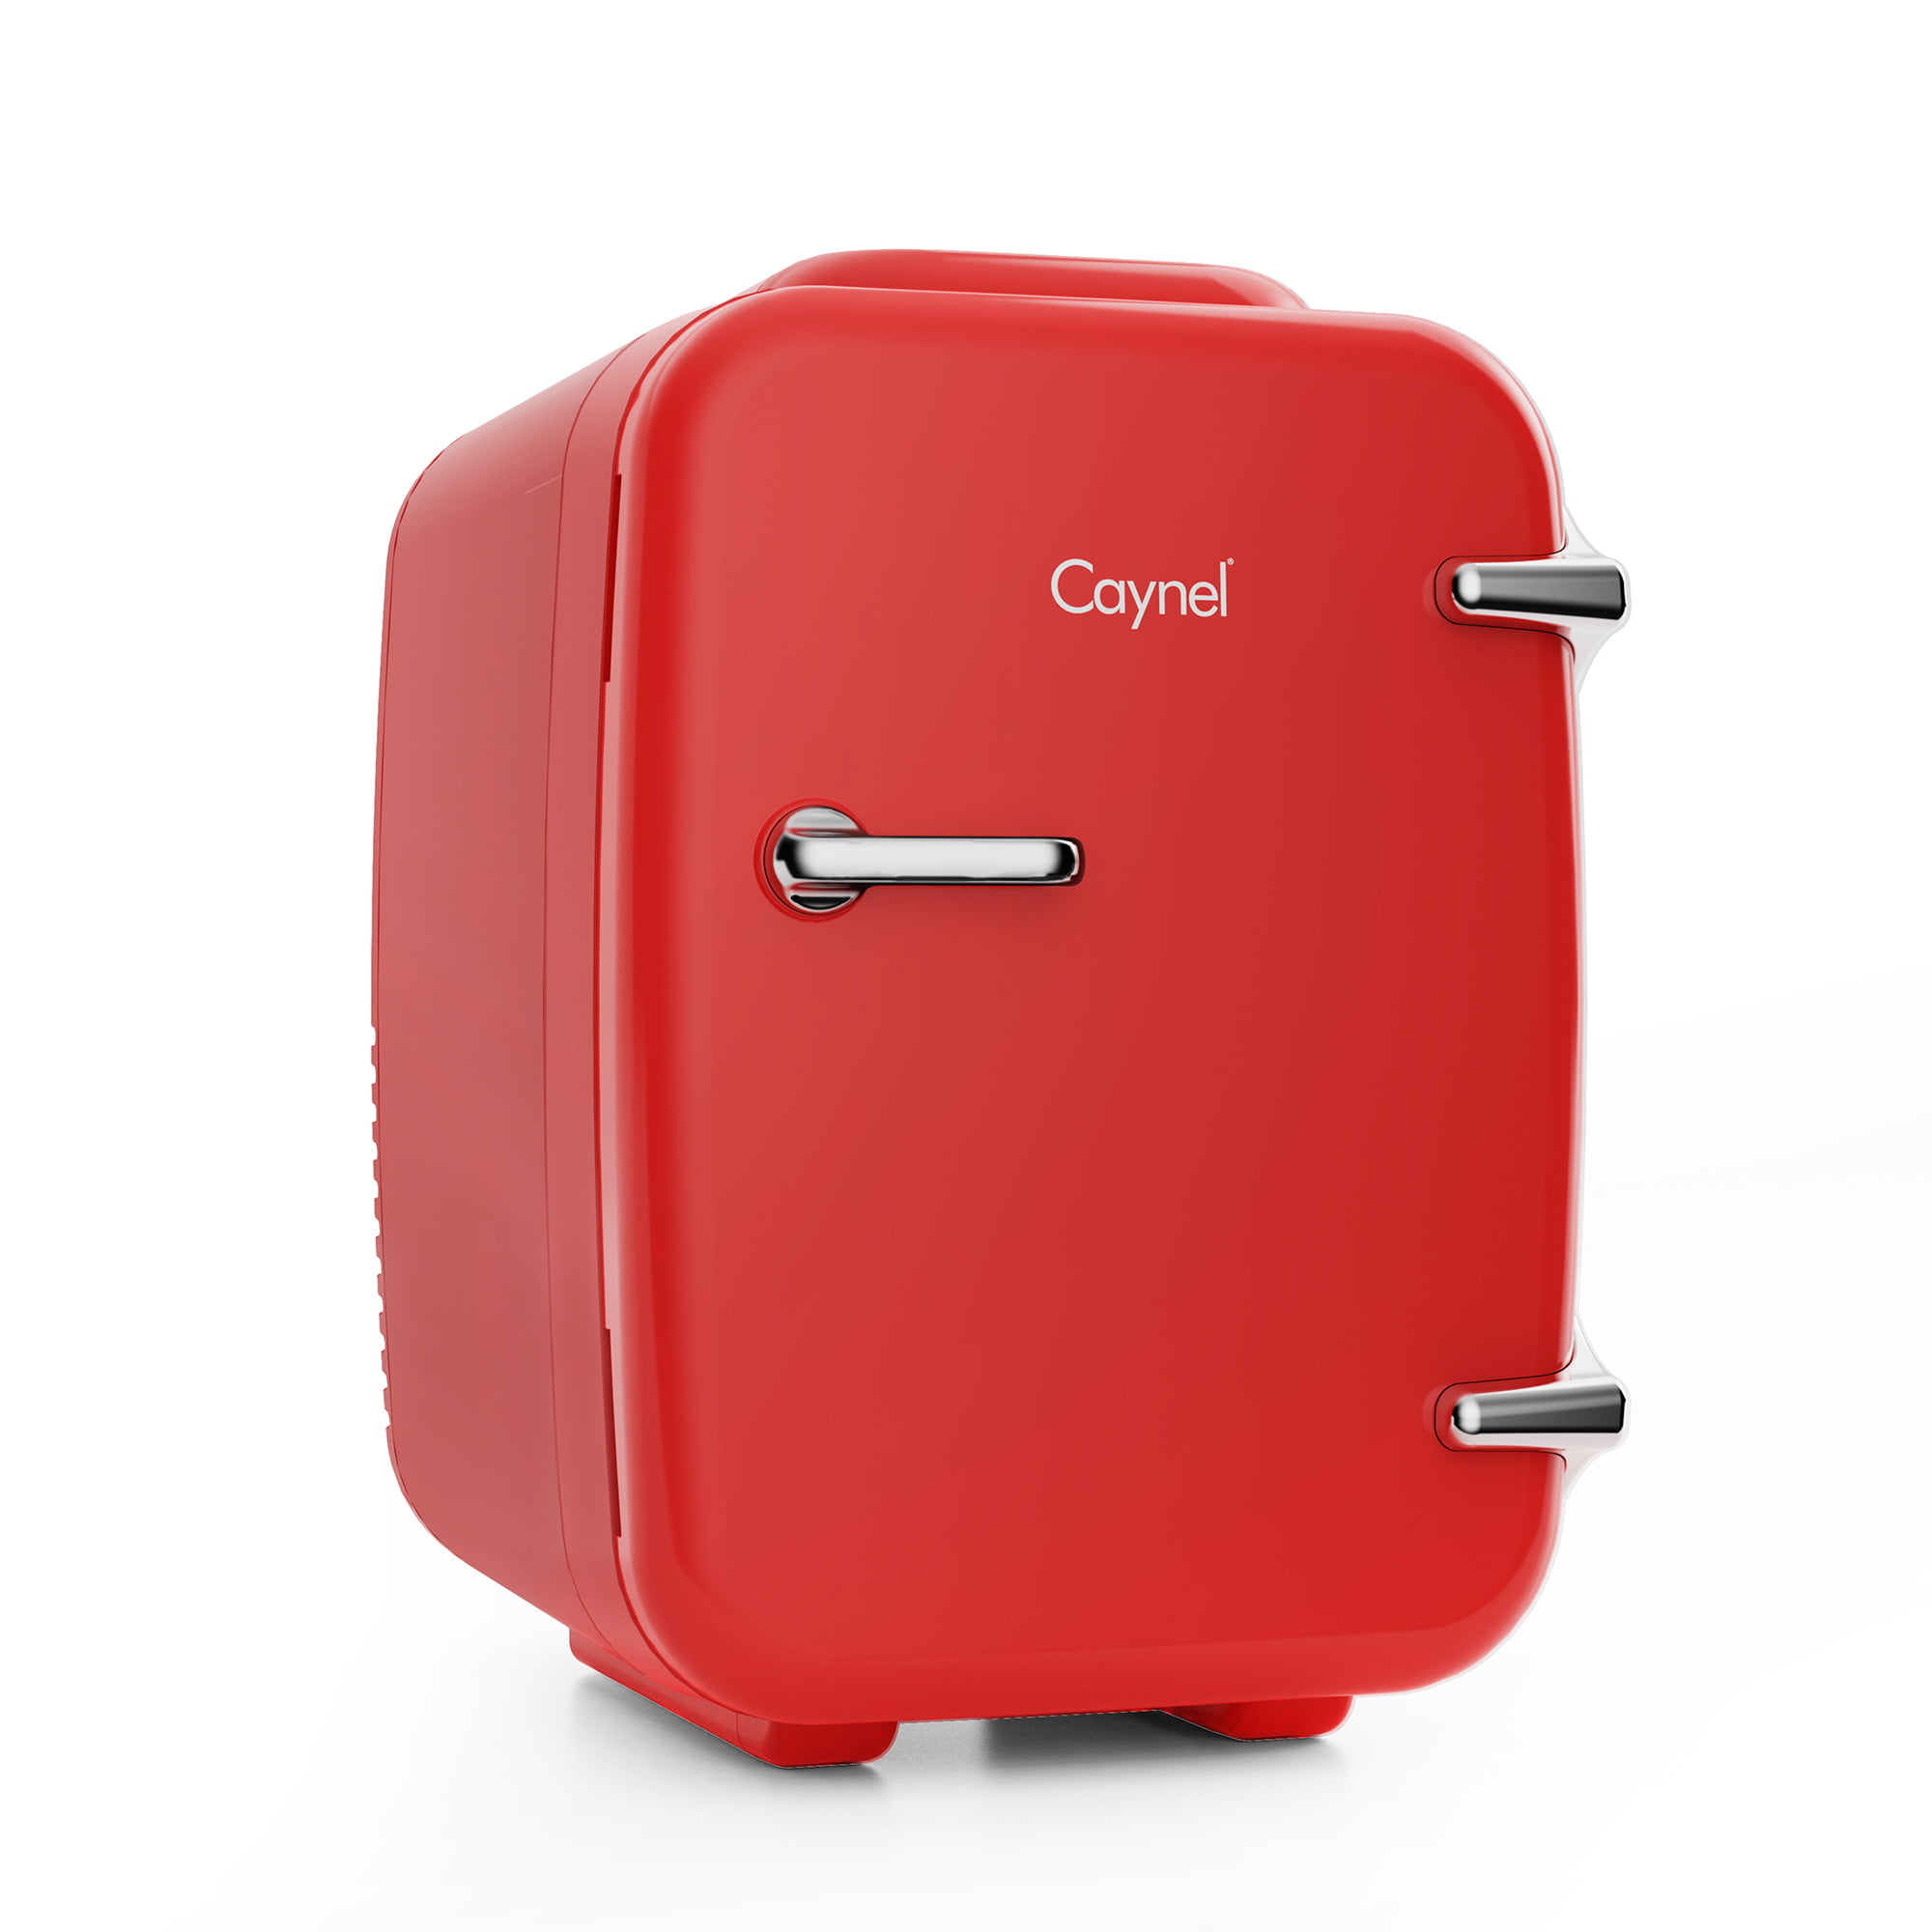 Caynel 4-Liter/6 Can Portable Mini Fridge with Warming Function, Red 